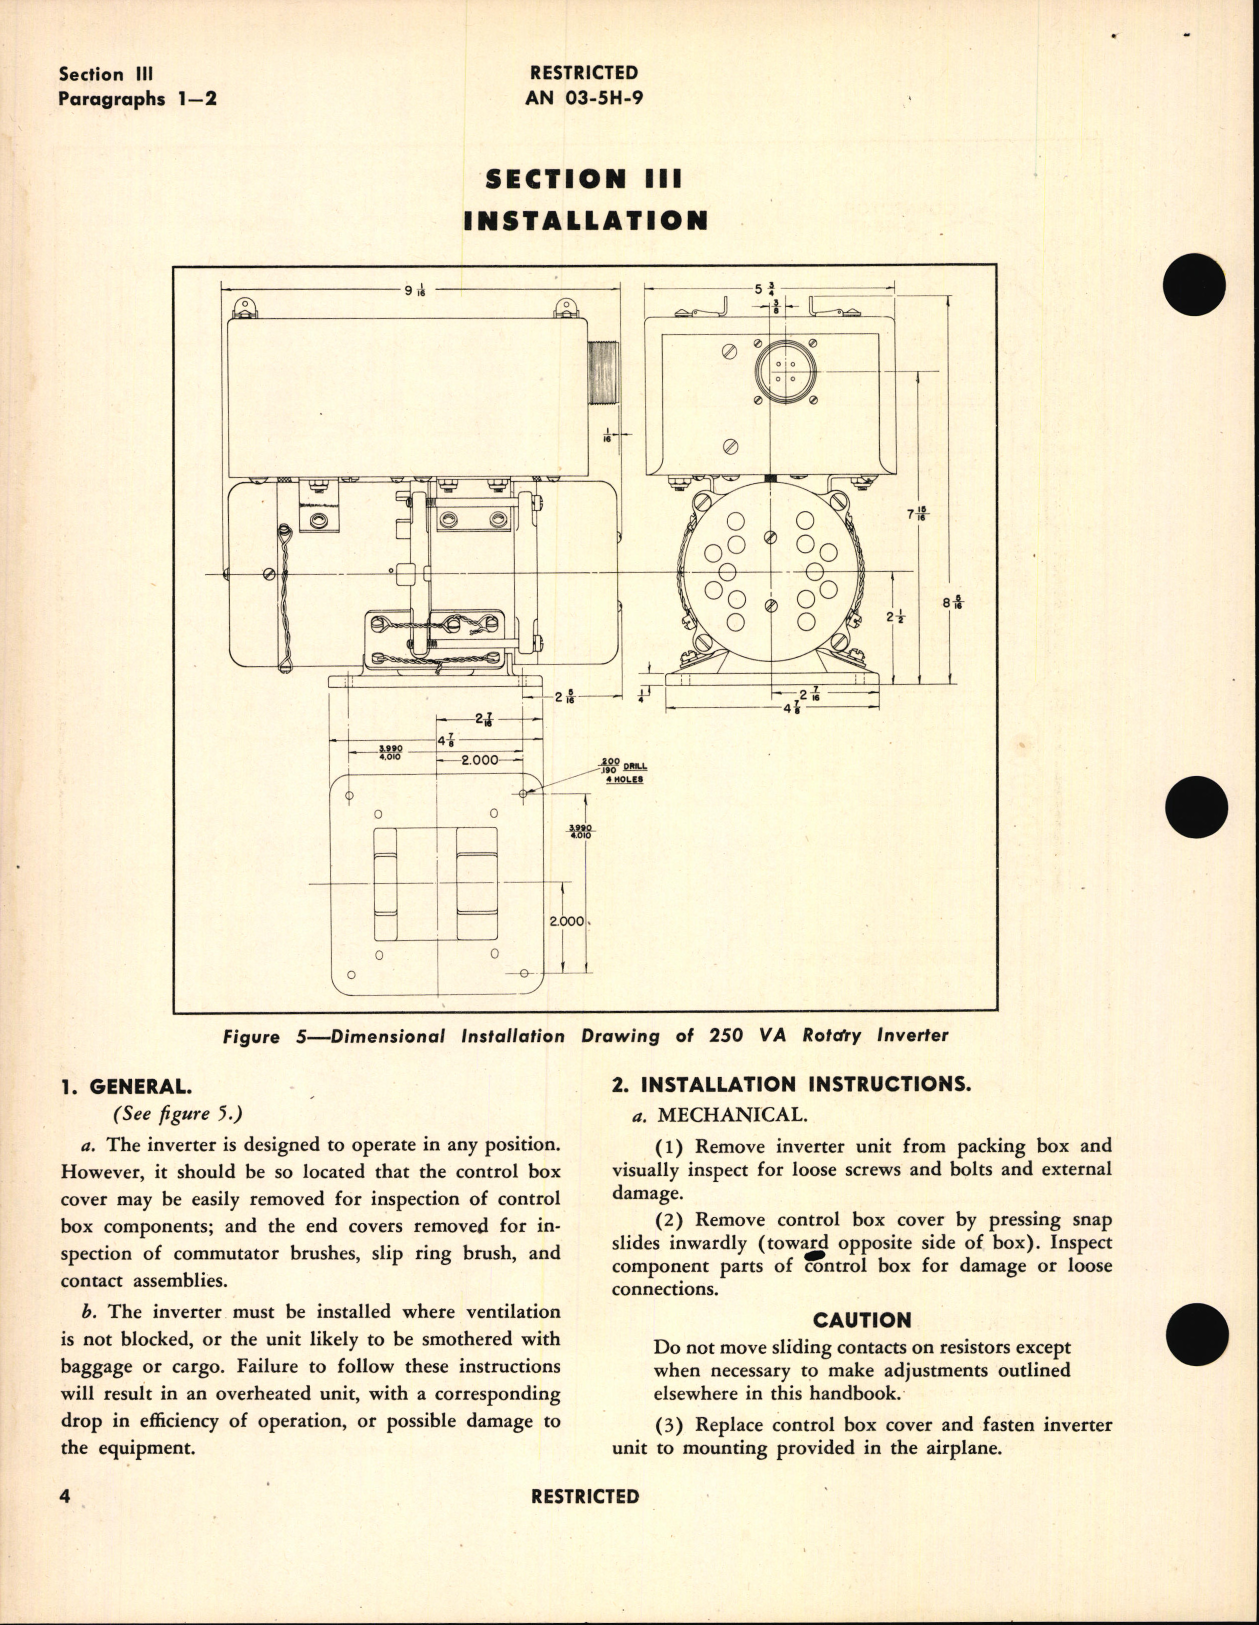 Sample page 8 from AirCorps Library document: Handbook of Instructions with Parts Catalog for 250 VA Rotary Inverter